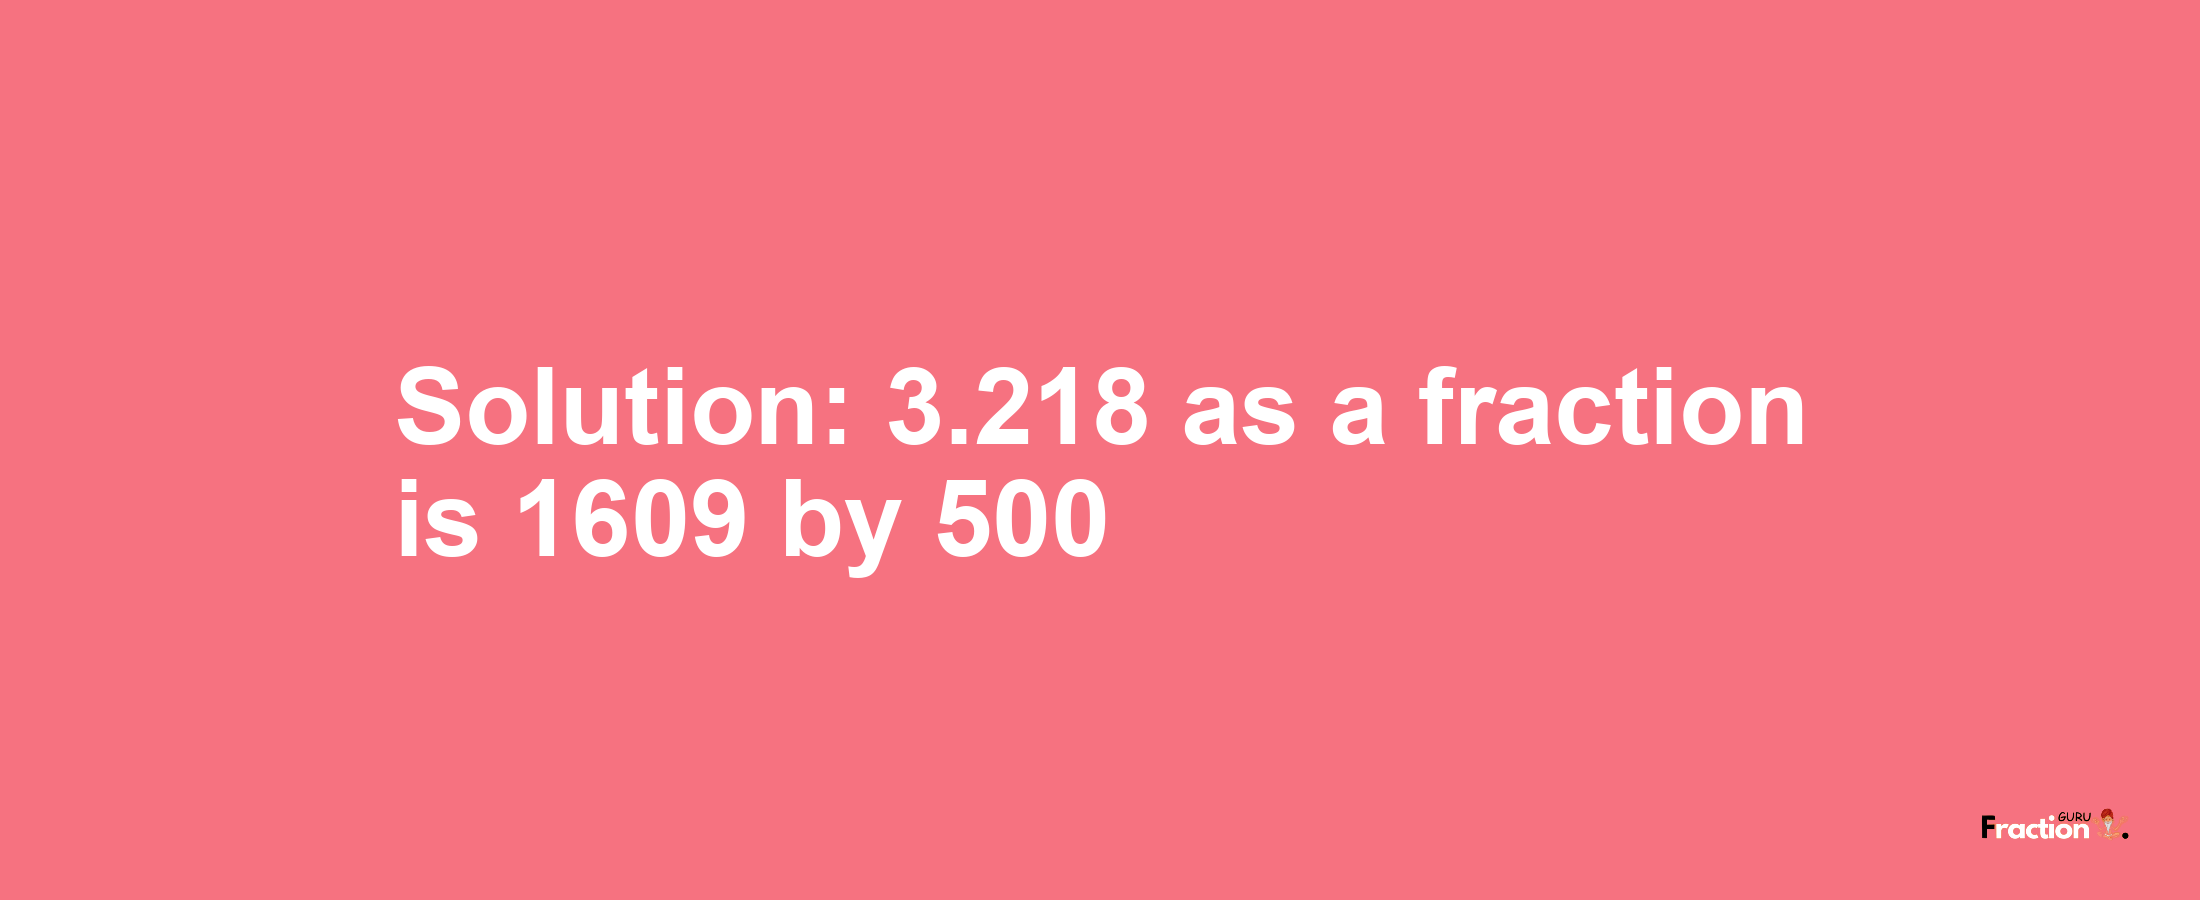 Solution:3.218 as a fraction is 1609/500